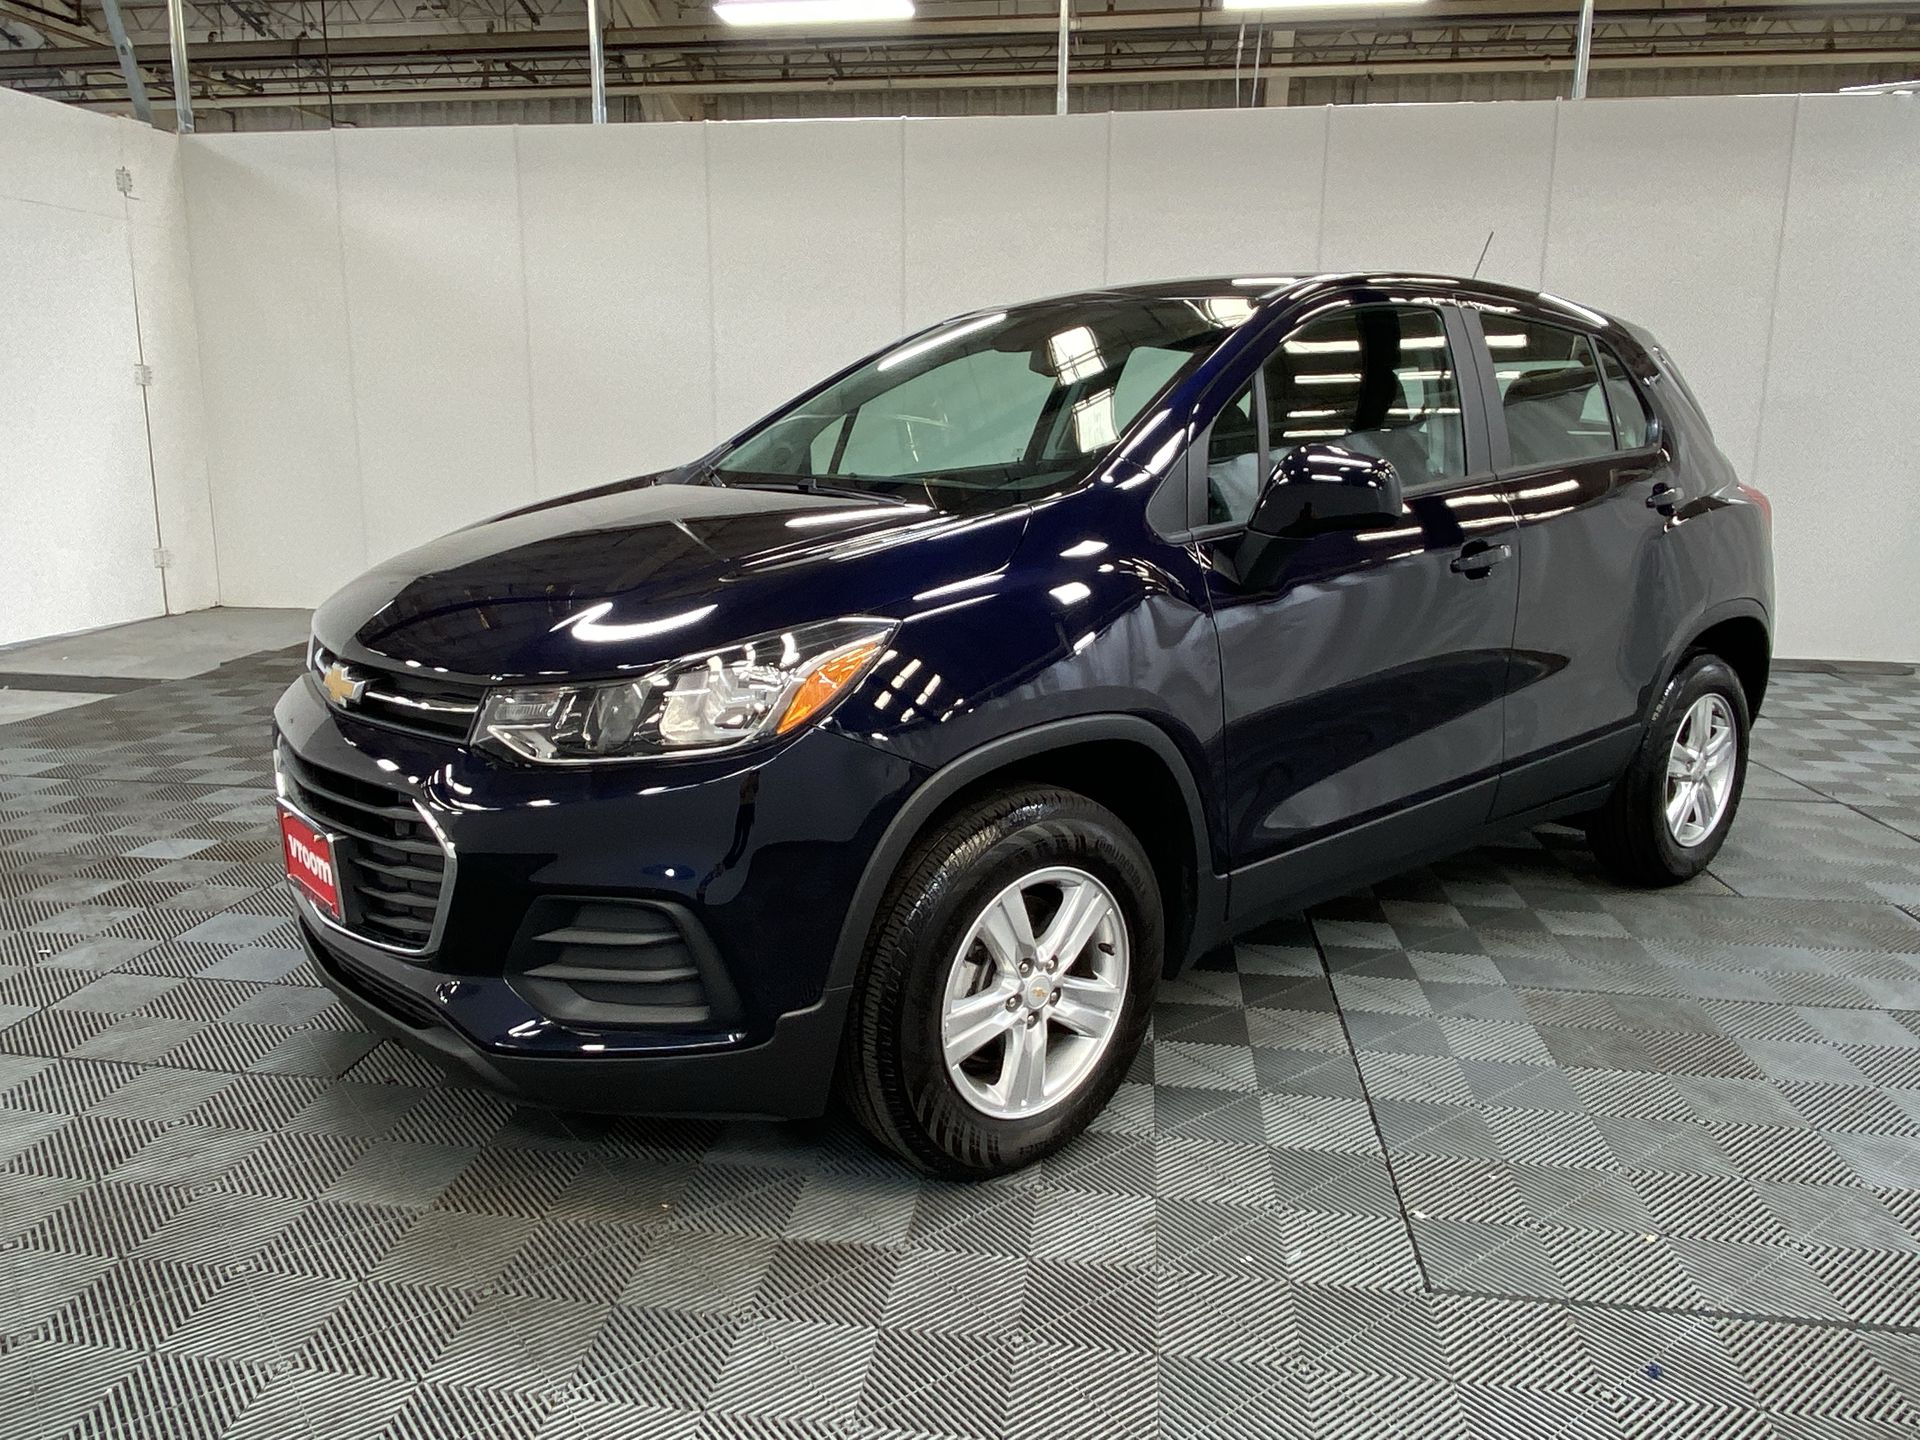 Used 2020 Chevrolet Trax For Sale 19499 Vroom 1920x1440